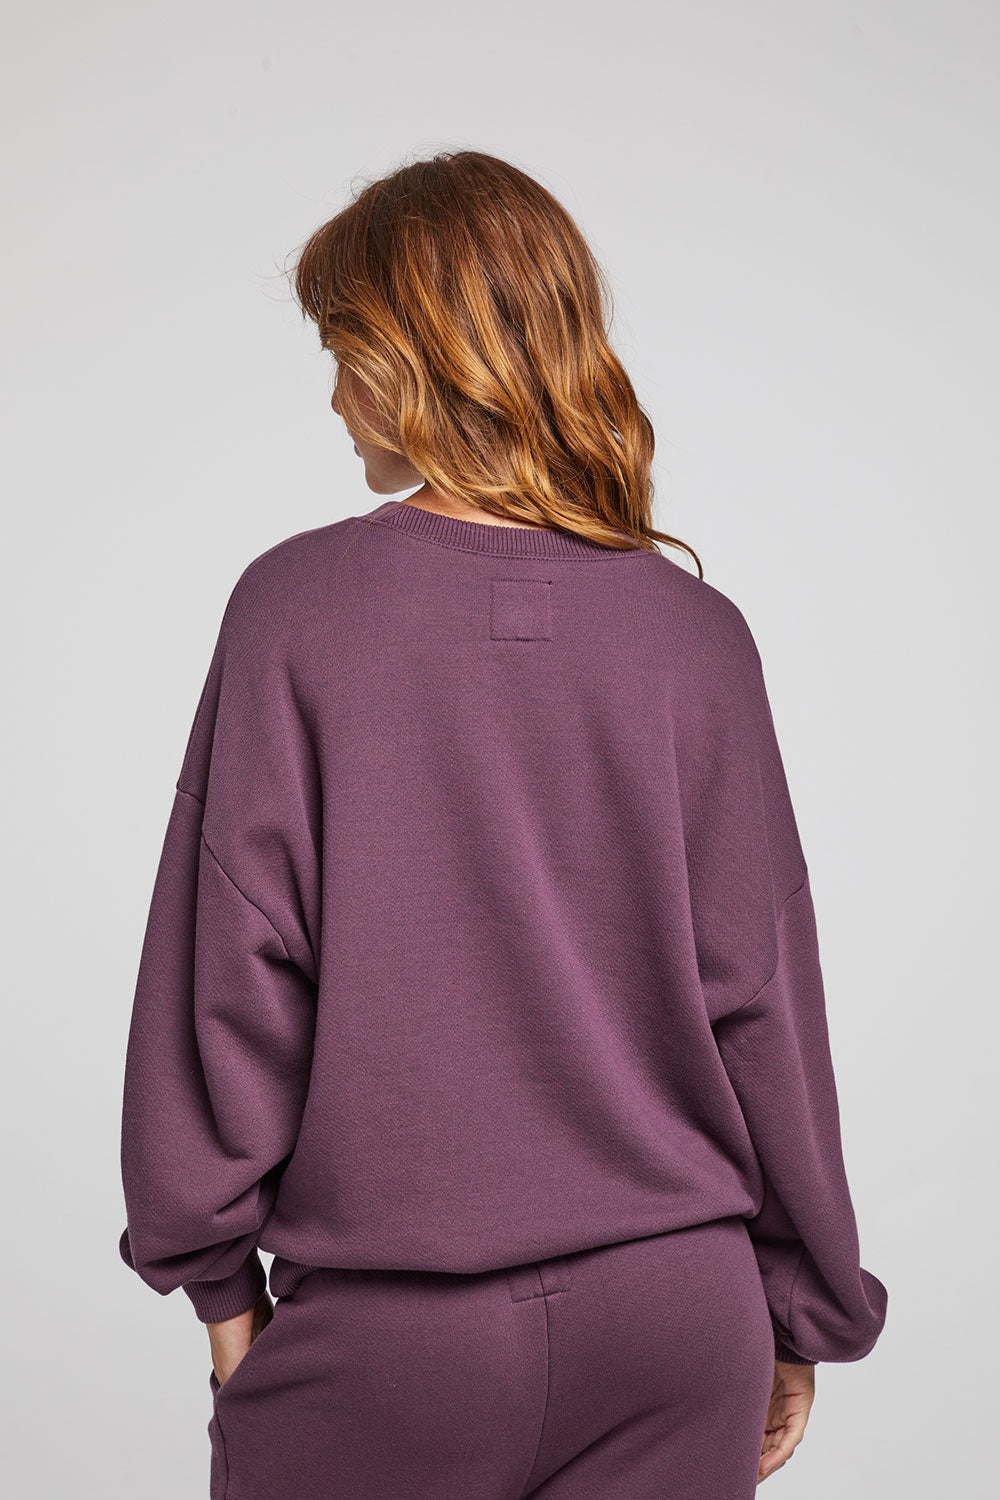 chaser-casbah-plum-pullover-03